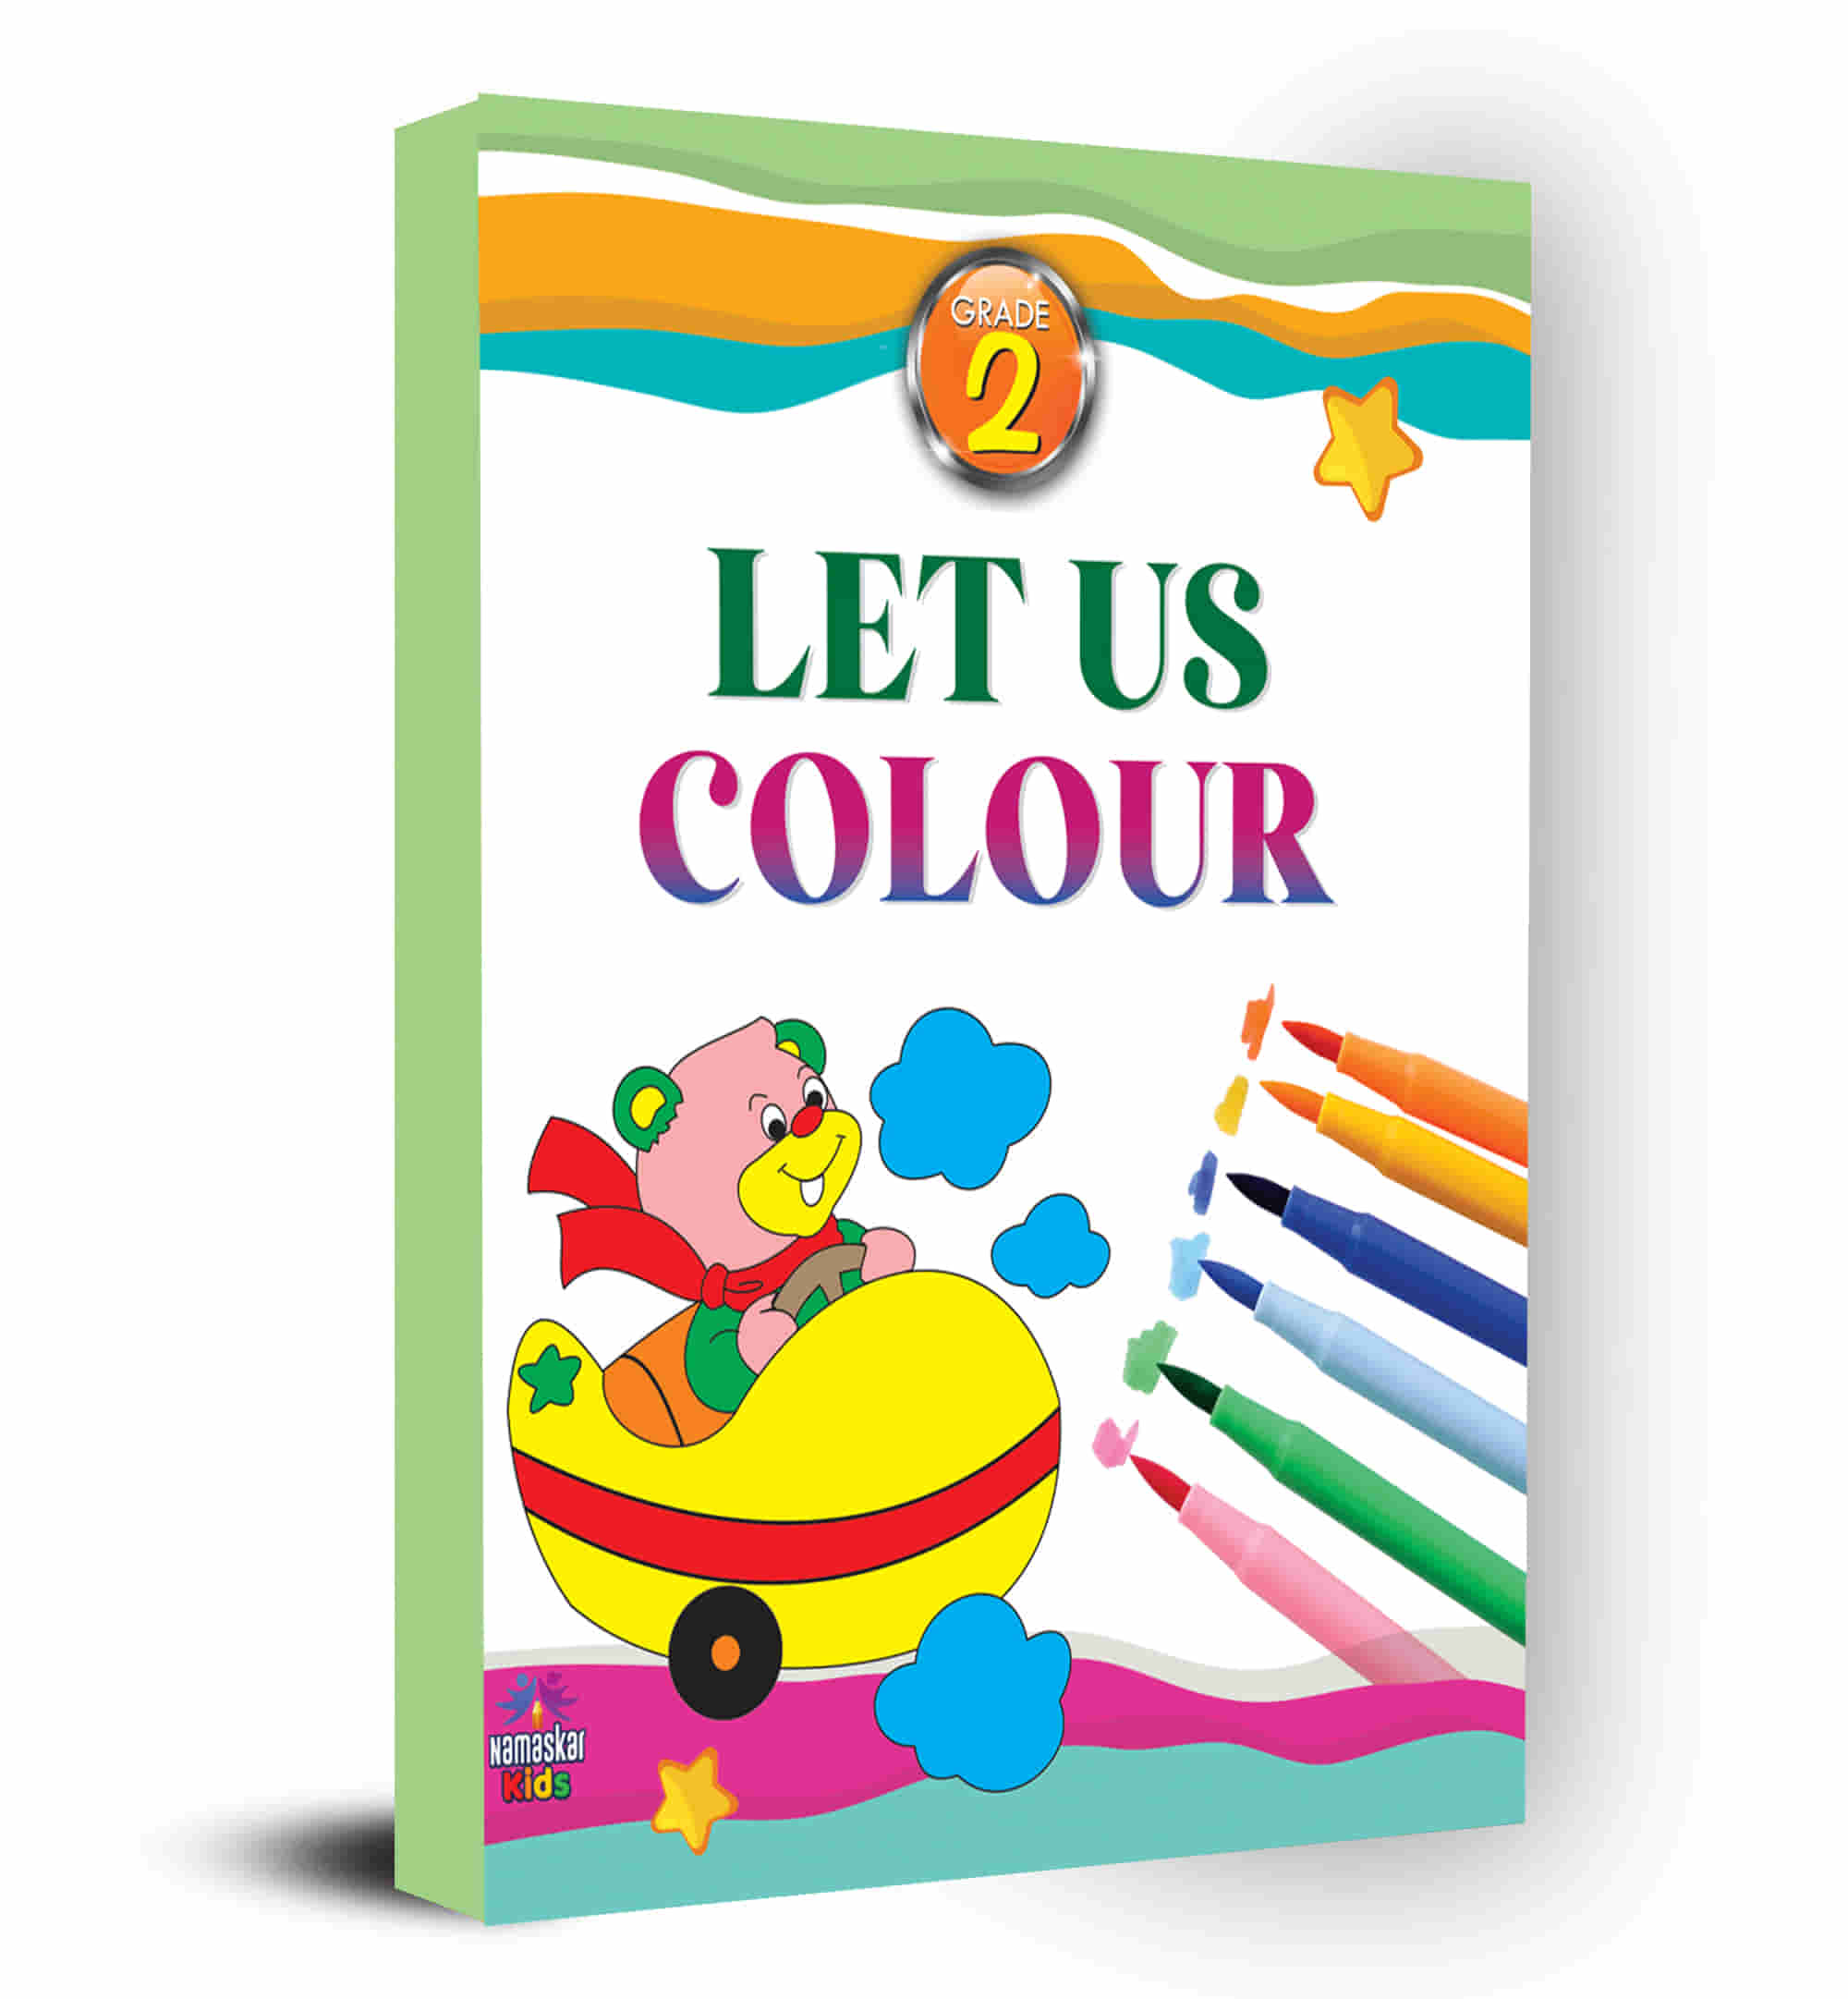 Let Us Colour Gift To Children for Painting Drawing Colouring Alphabets Animals Birds Flags Flowers Transport, Vegetables - 3 to 6 years Old Little Colouring Books for Kids